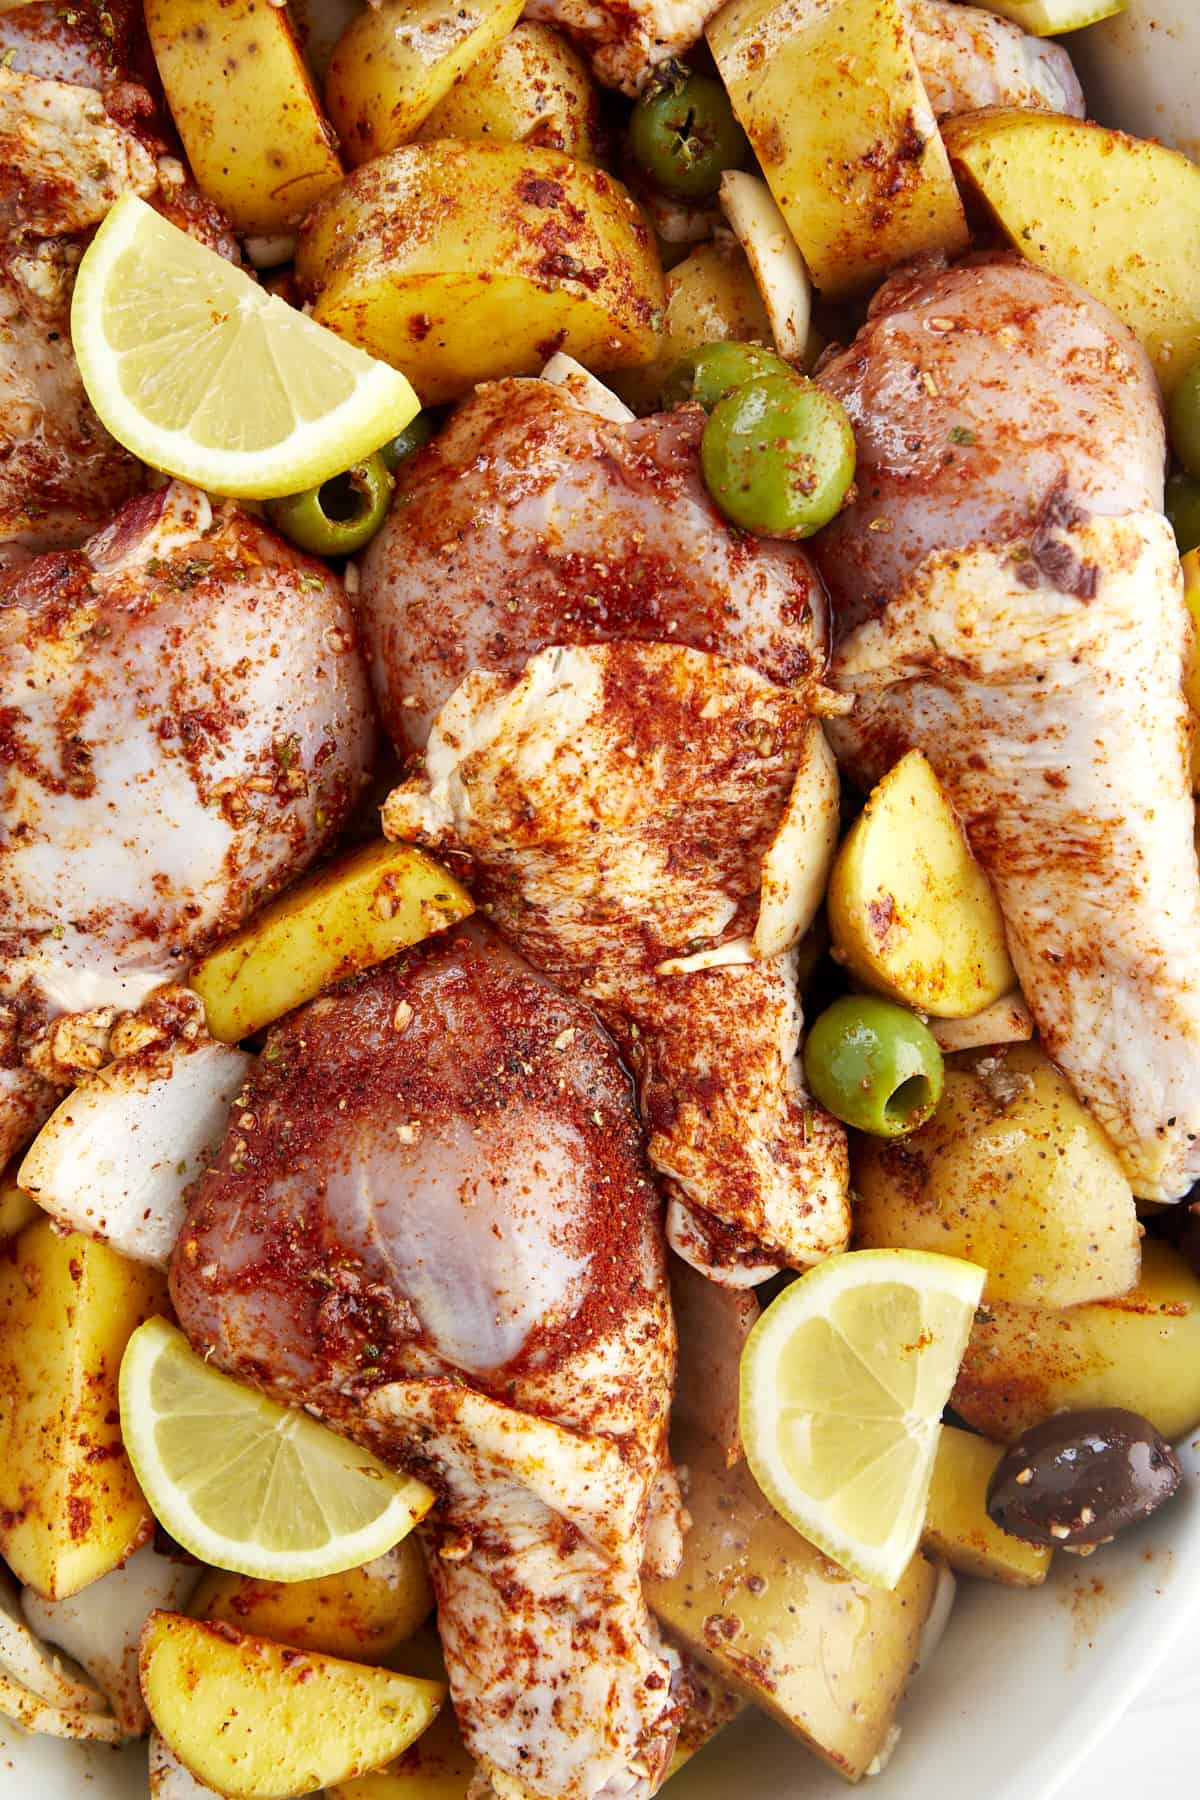 Raw chicken drumsticks with golden potatoes, red and green olives, onions, and garlic coated with seasonings and topped with lemon wedges. 